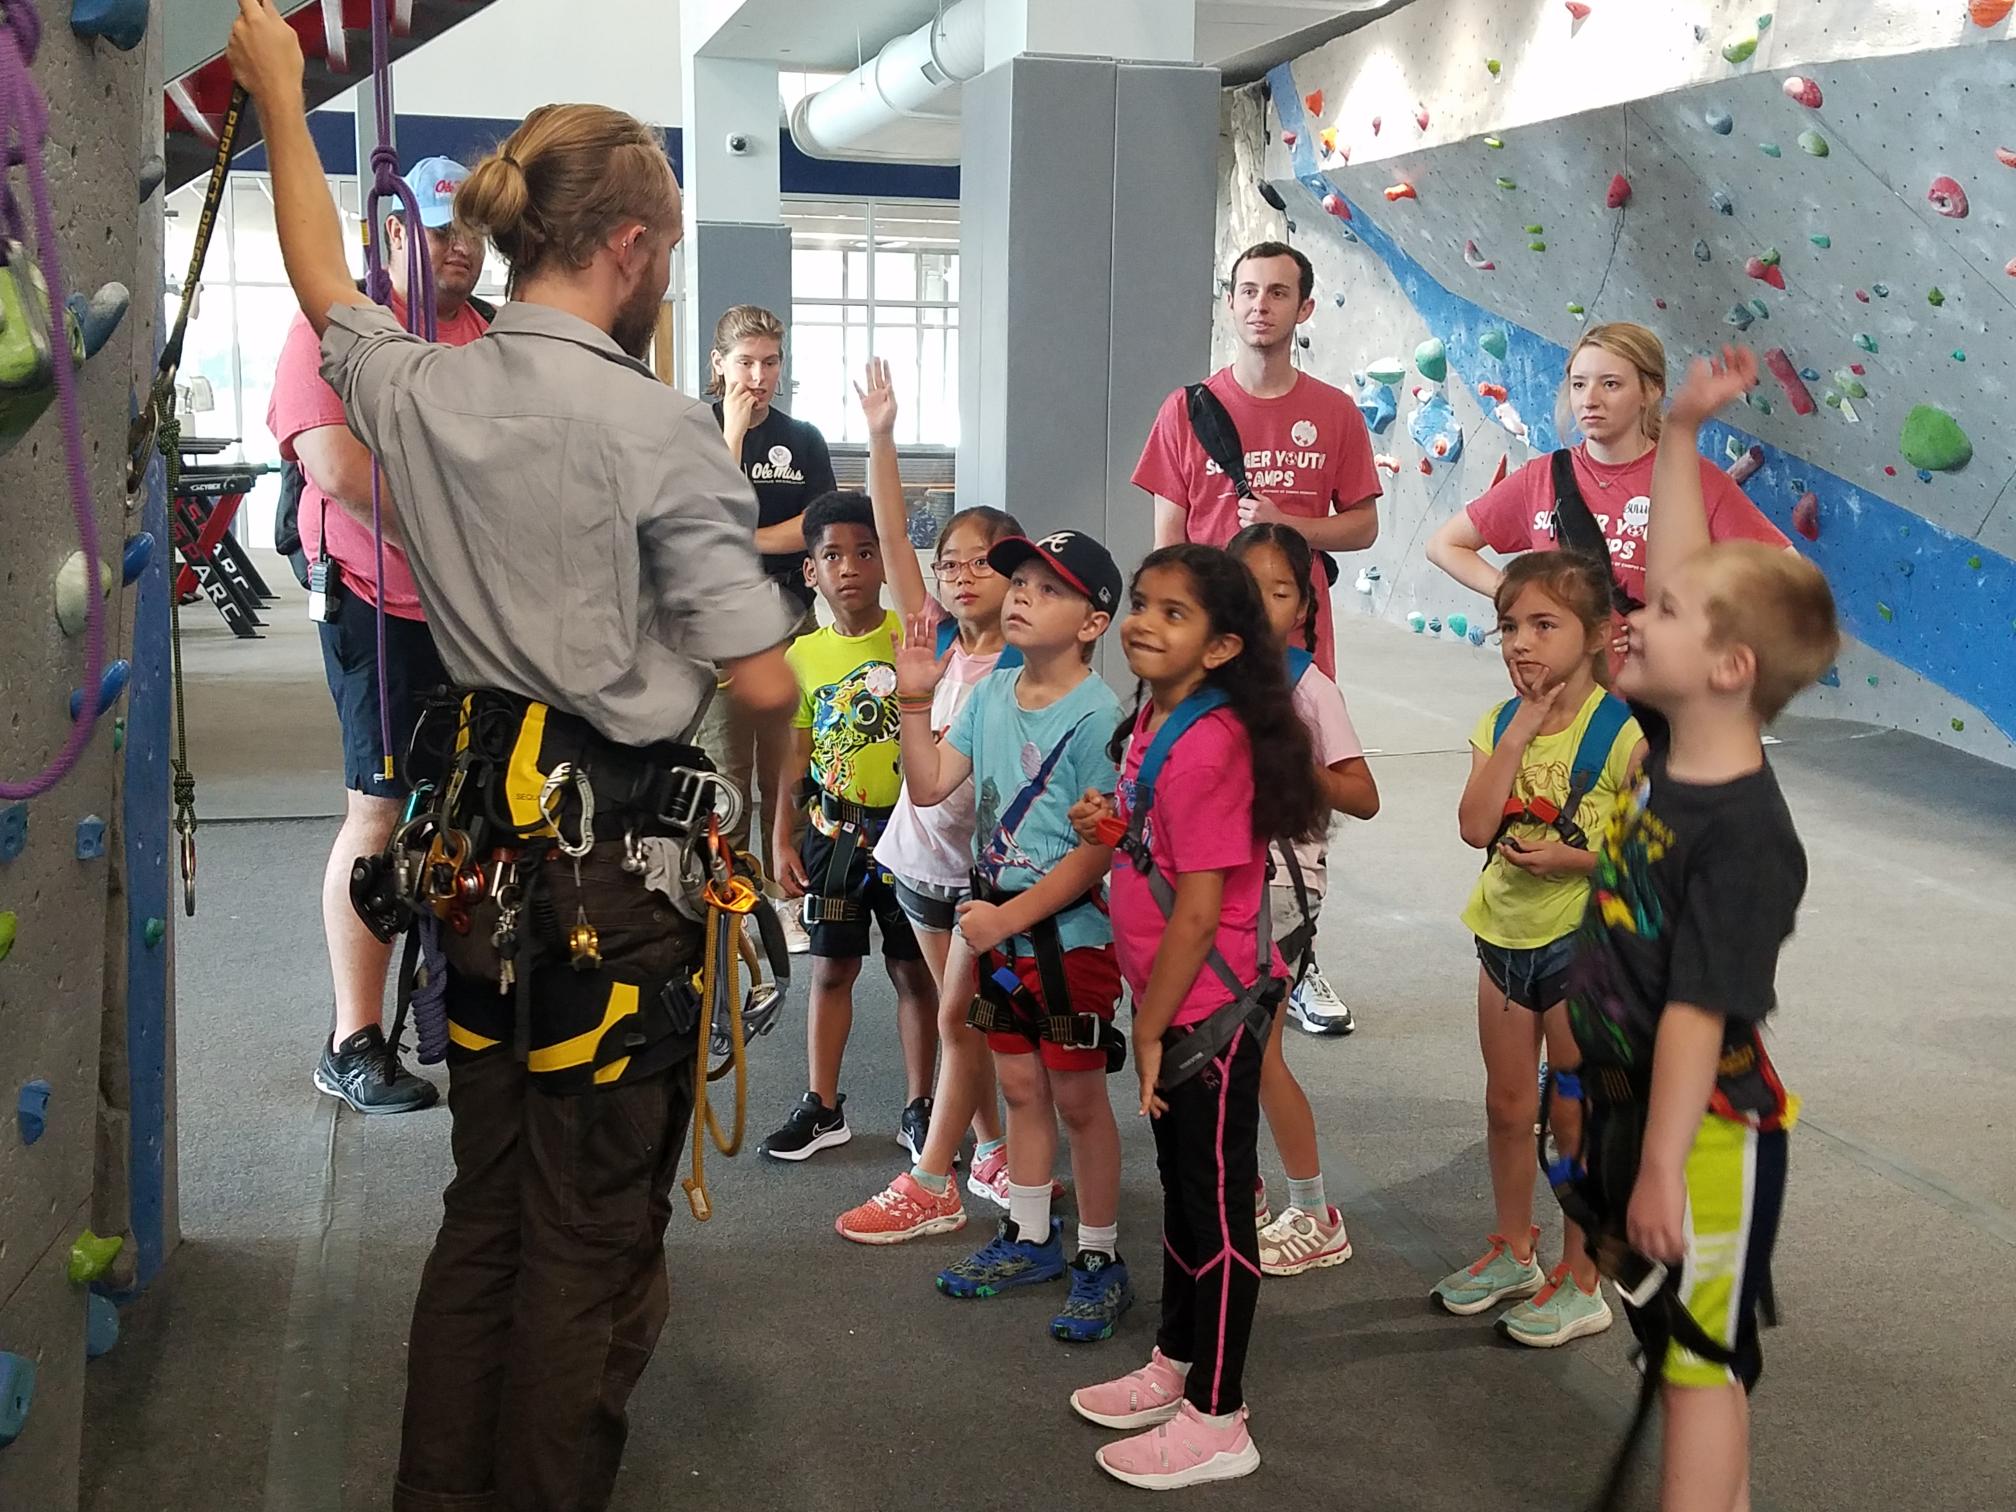 Group of children wearing climbing harnesses are listening to a person instructing them on using a climbing wall. One child has his had raised.